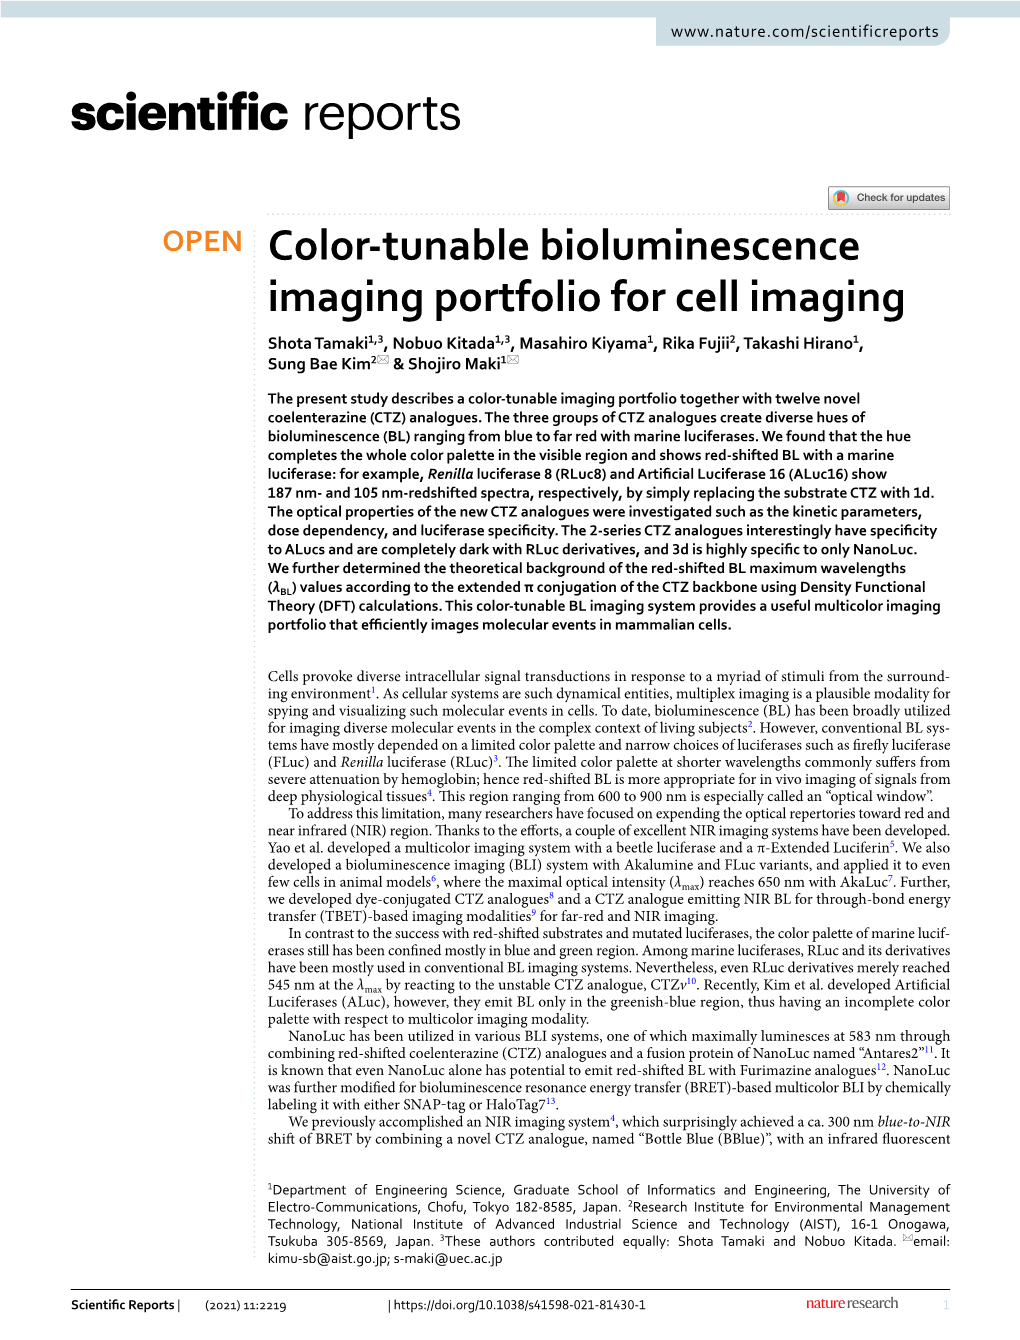 Color-Tunable Bioluminescence Imaging Portfolio for Cell